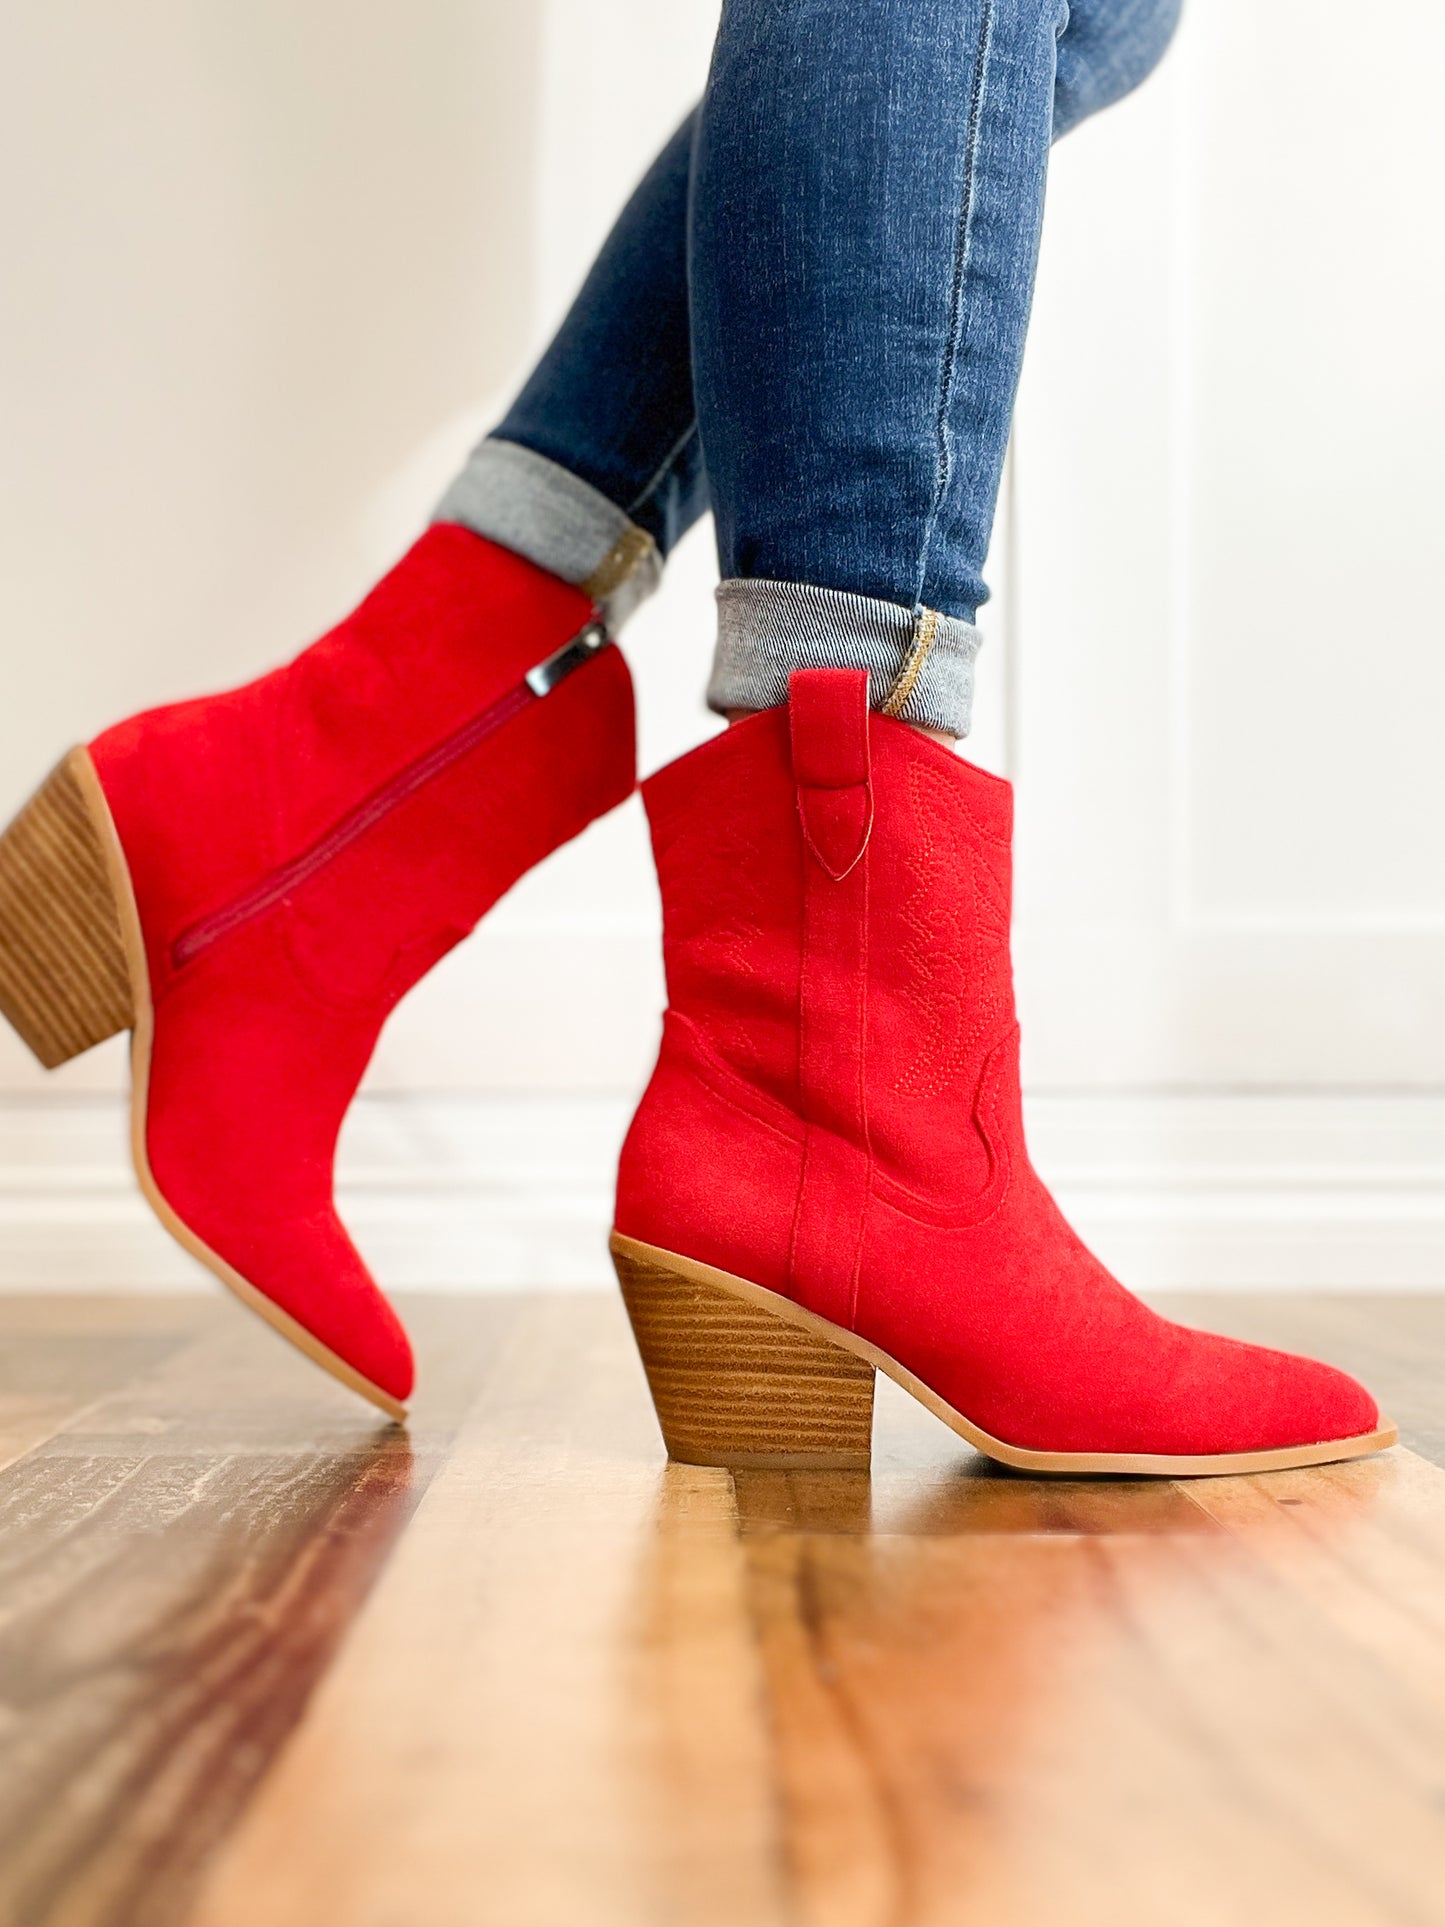 Corkys Rowdy Booties in Red Suede * FINAL SALE